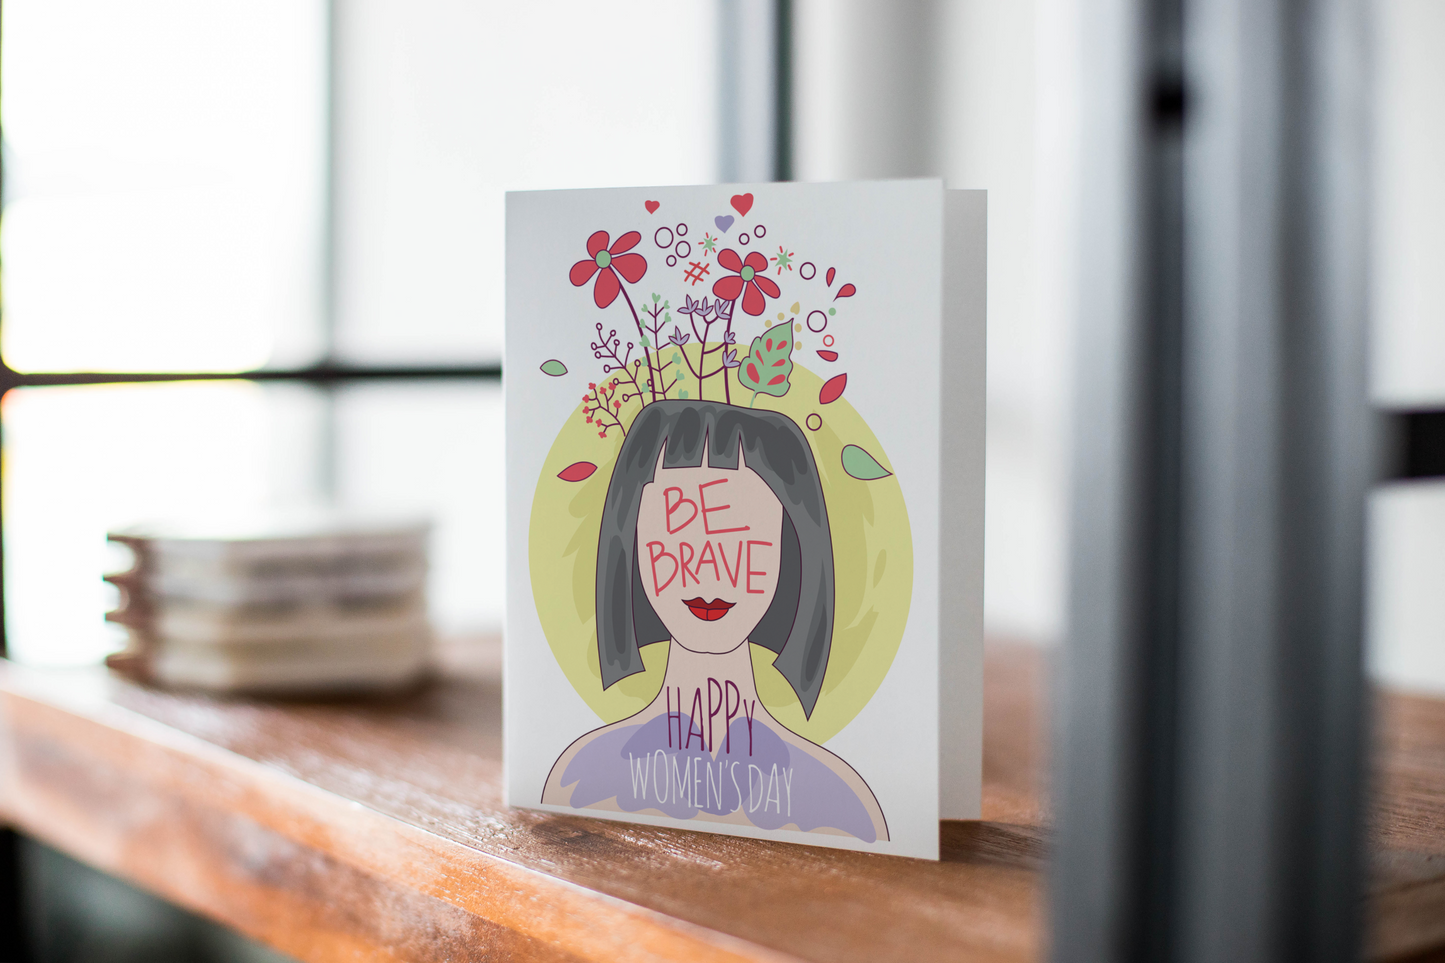 Women's Day Greeting Card - Be Brave Greeting Card.